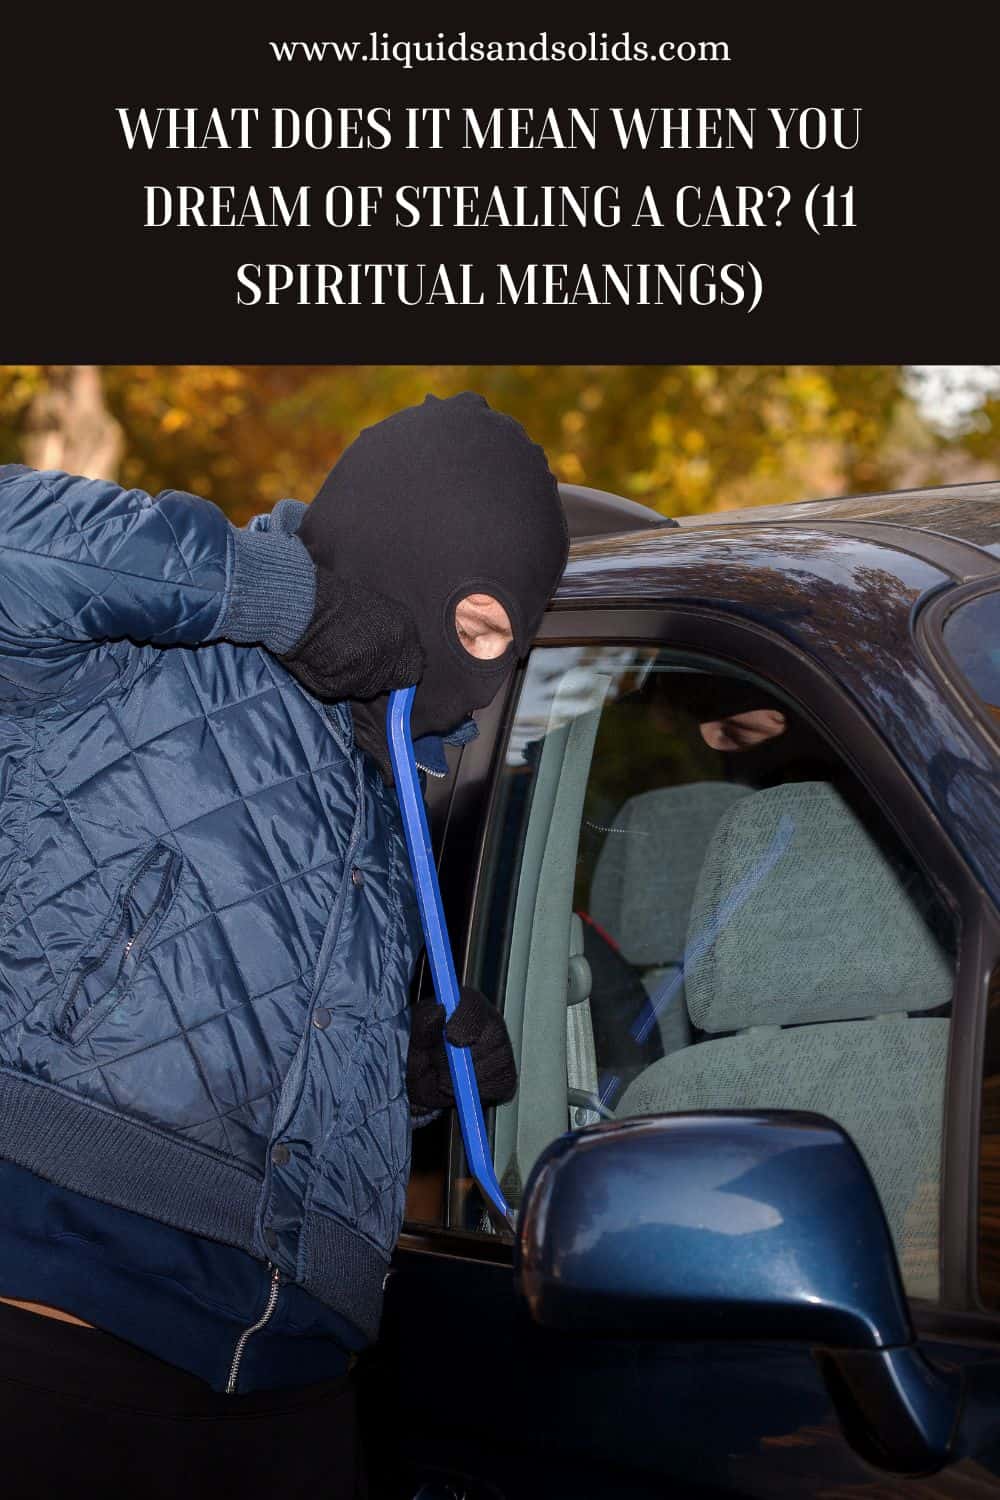 What Does It Mean When You Dream of Stealing a Car (11 Spiritual Meanings)